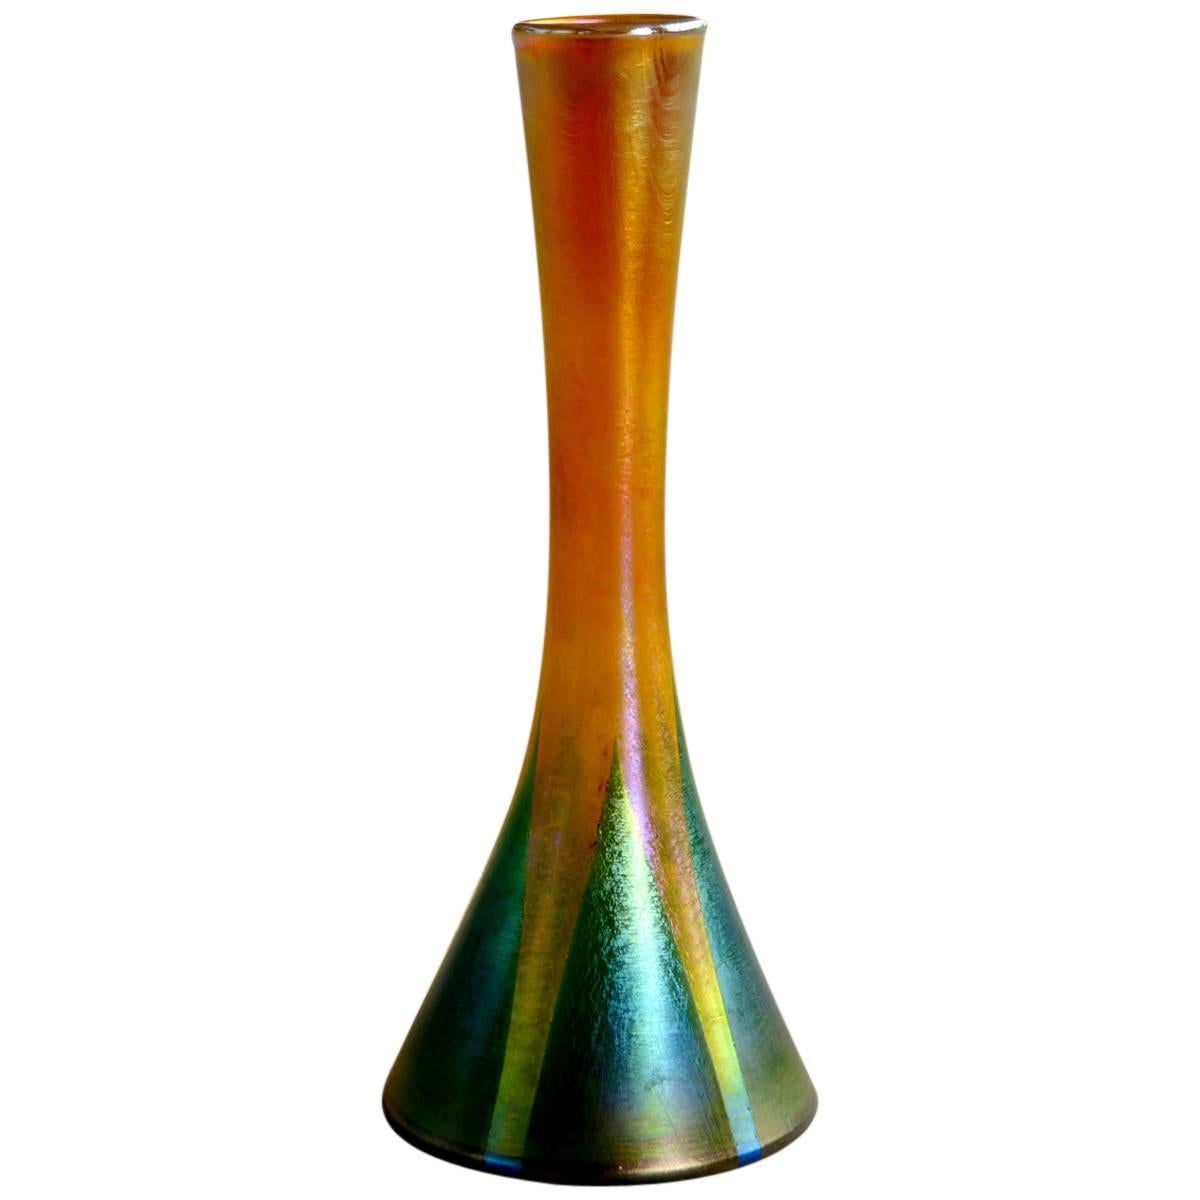 Favrile Glass Vase by Louis Comfort Tiffany For Sale